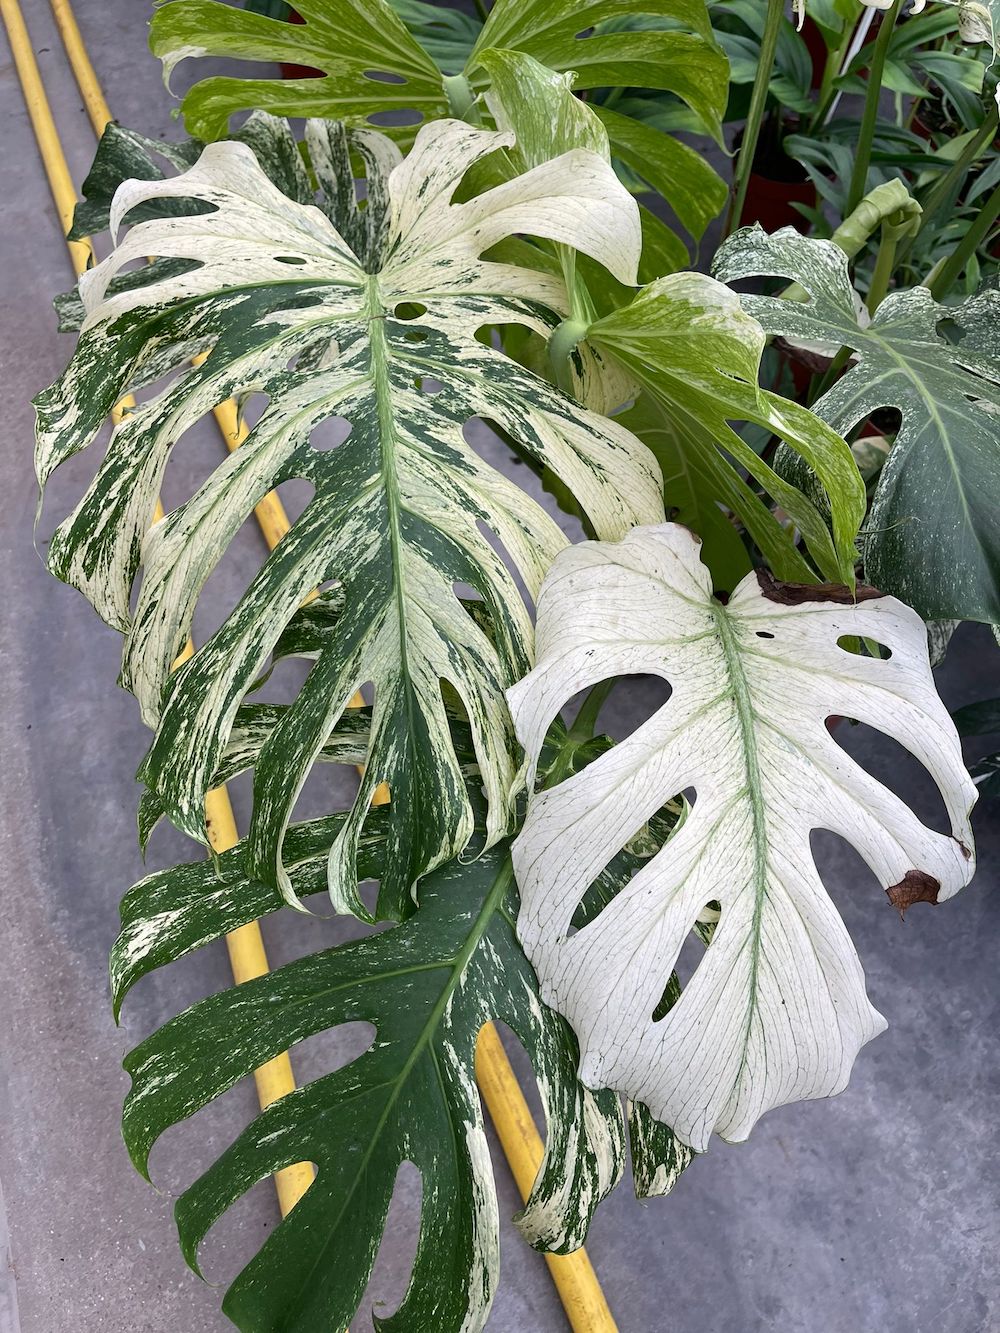 Monstera Deliciosa Mint Variegated - A Rare Houseplant You'll Want to Have in 2022 - Article on Thursd